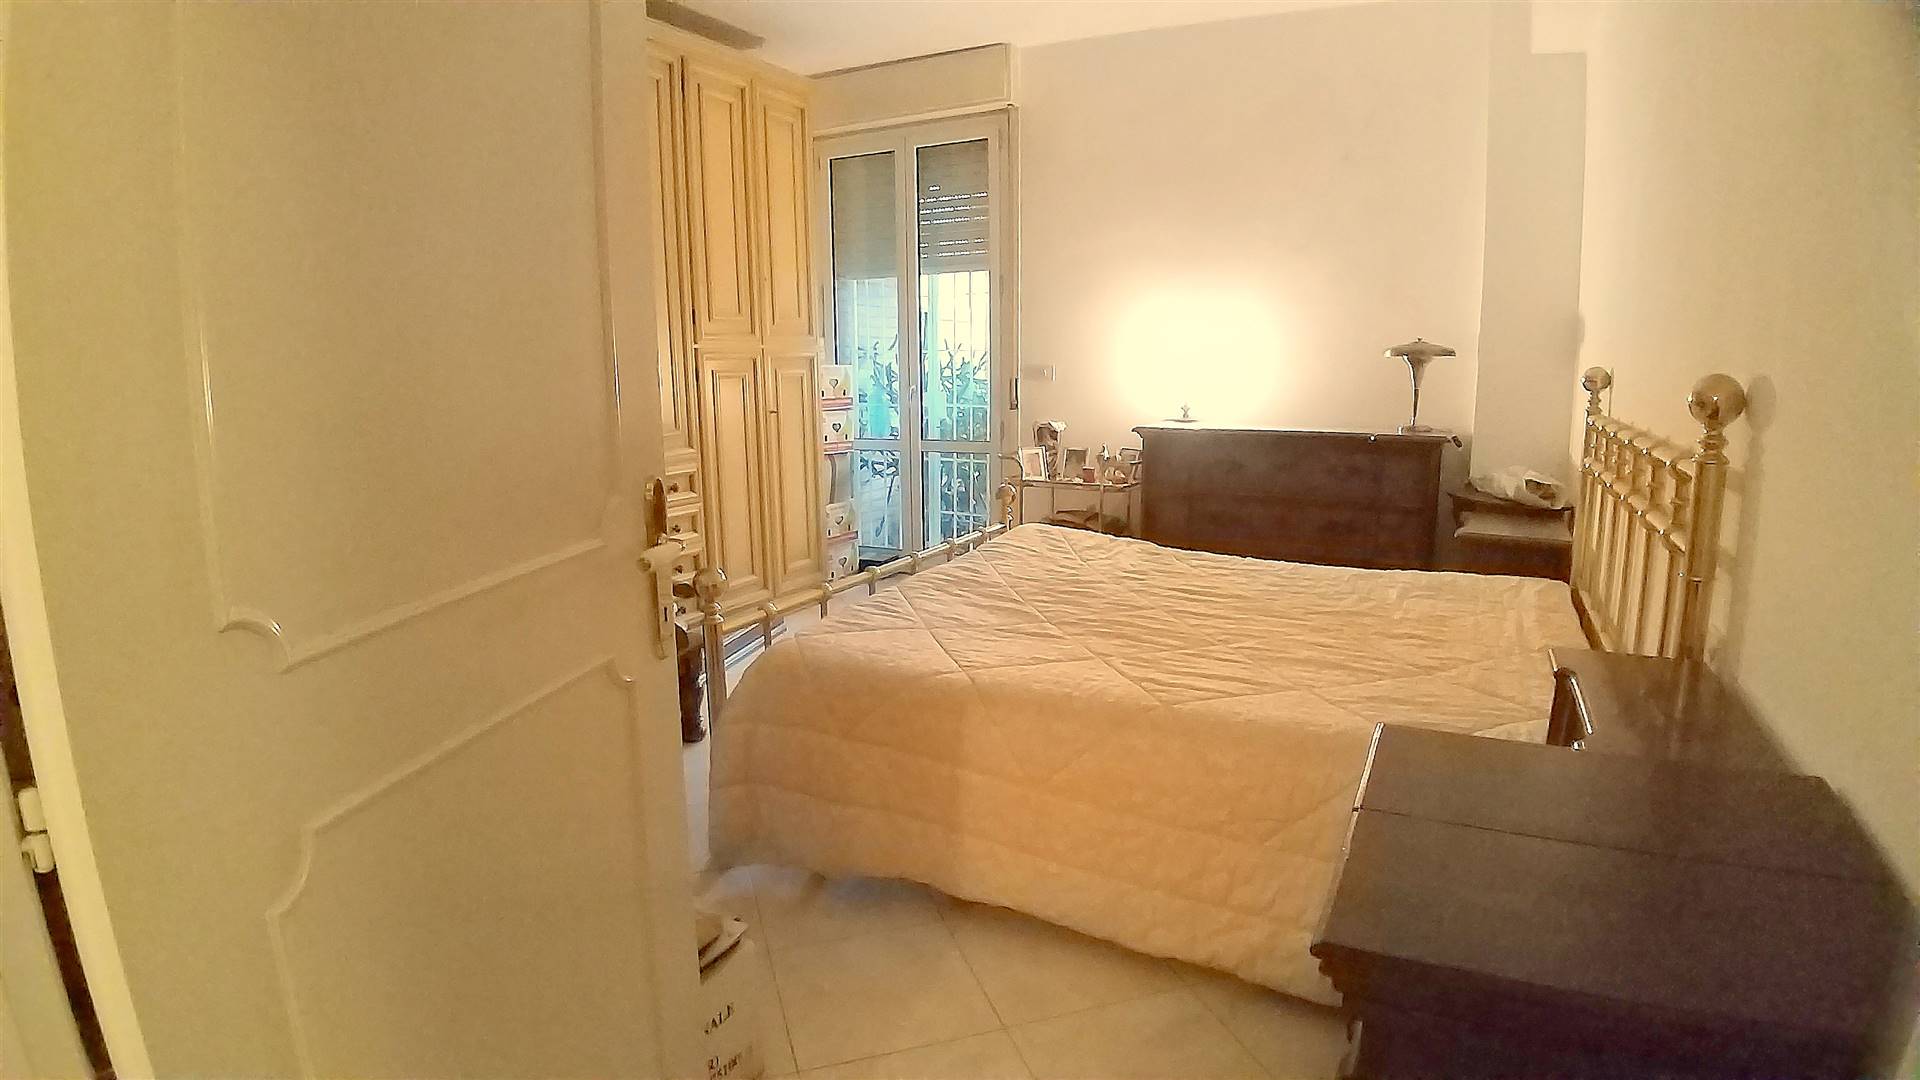 This apartment, a spacious 5-room apartment, is located on the second floor of a building with a total of three, in the area between Gorarella and 